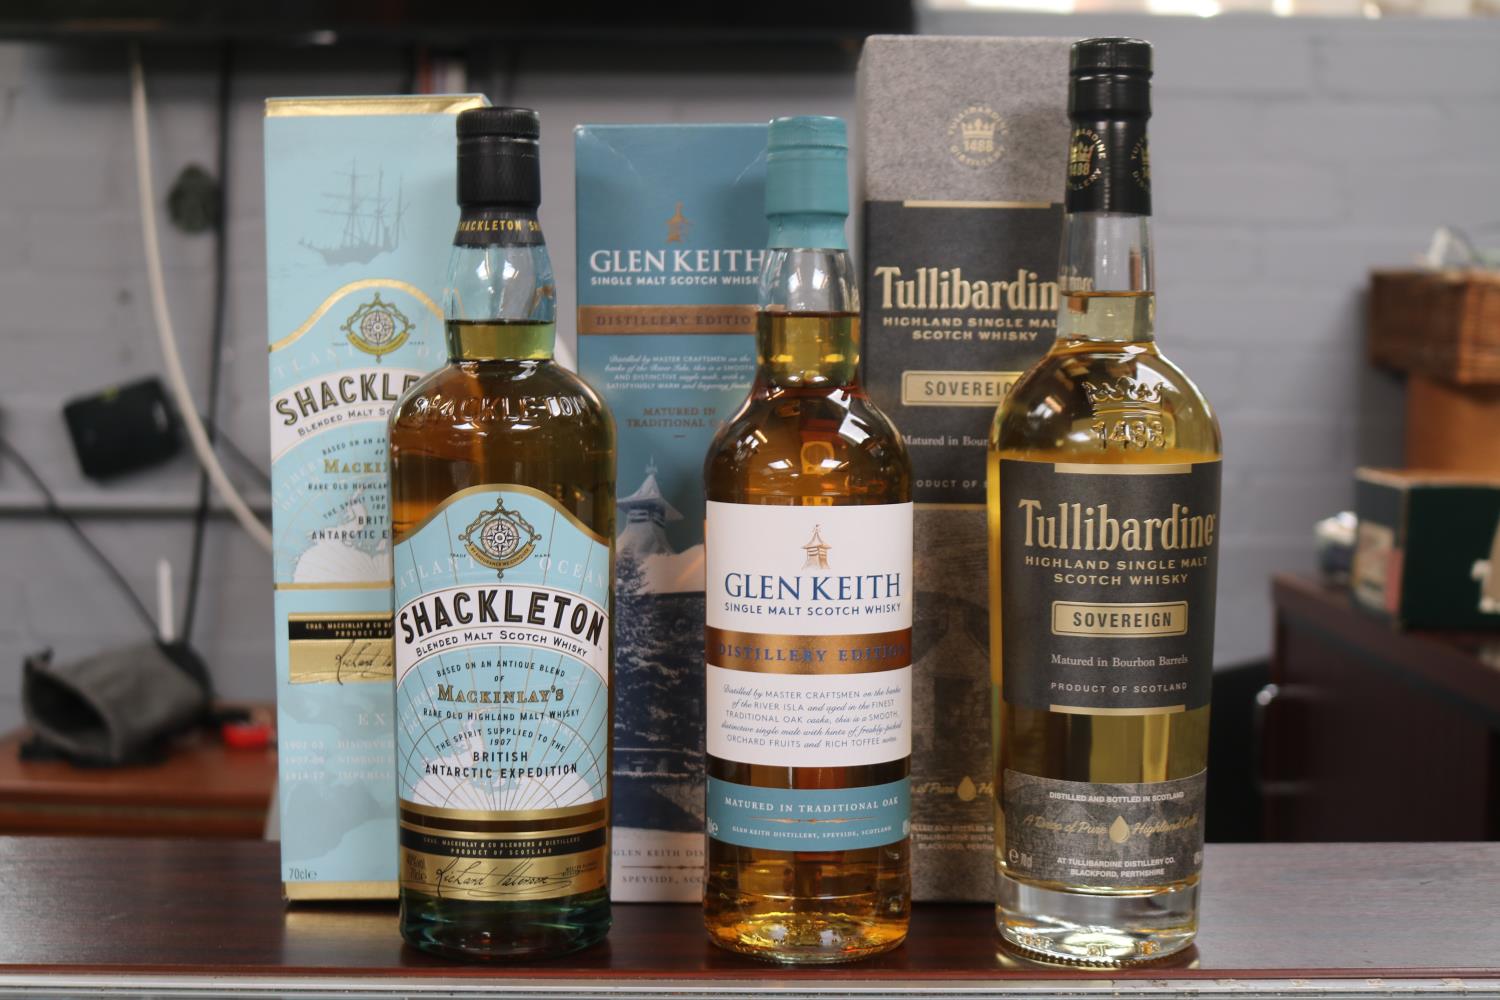 3 Boxed Whiskies to include Glan Keith Single Malt Scotch Whisky Distillery Edition, Shackleton